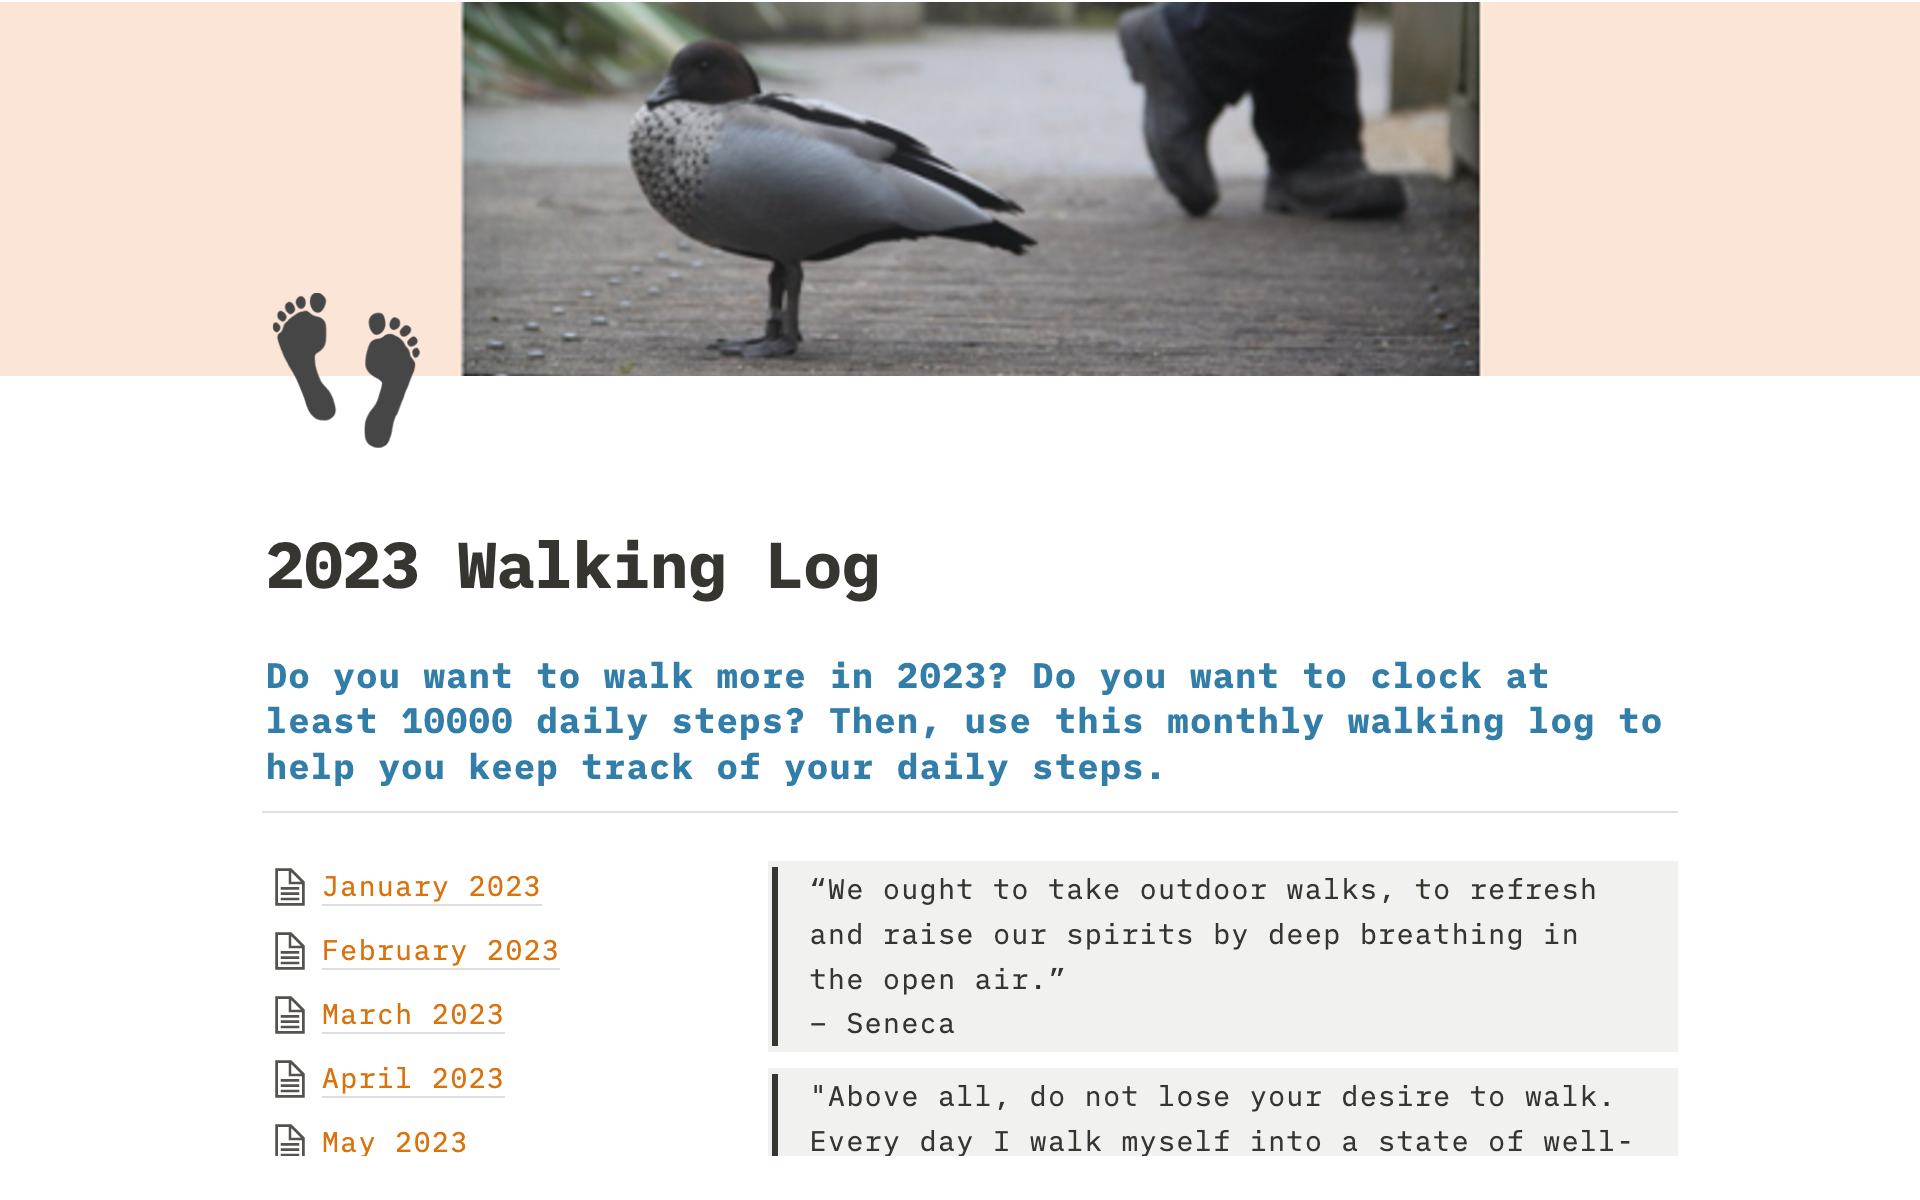 Walking log to help individuals keep track of their daily steps.